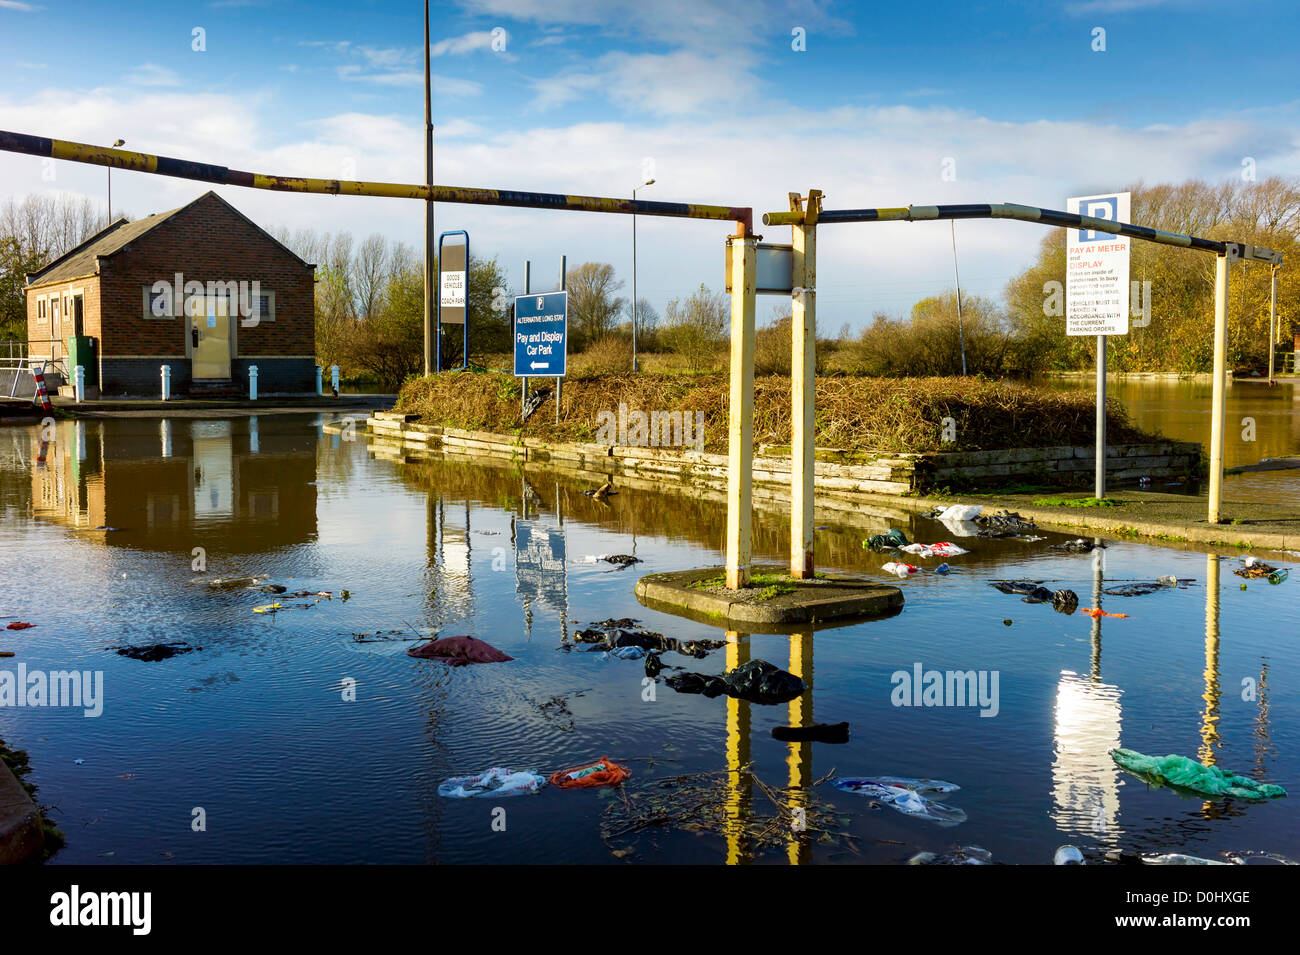 After days of rainfall the car park is closed, scenes of flooding, floating debris, abandoned cars await their owners Stock Photo